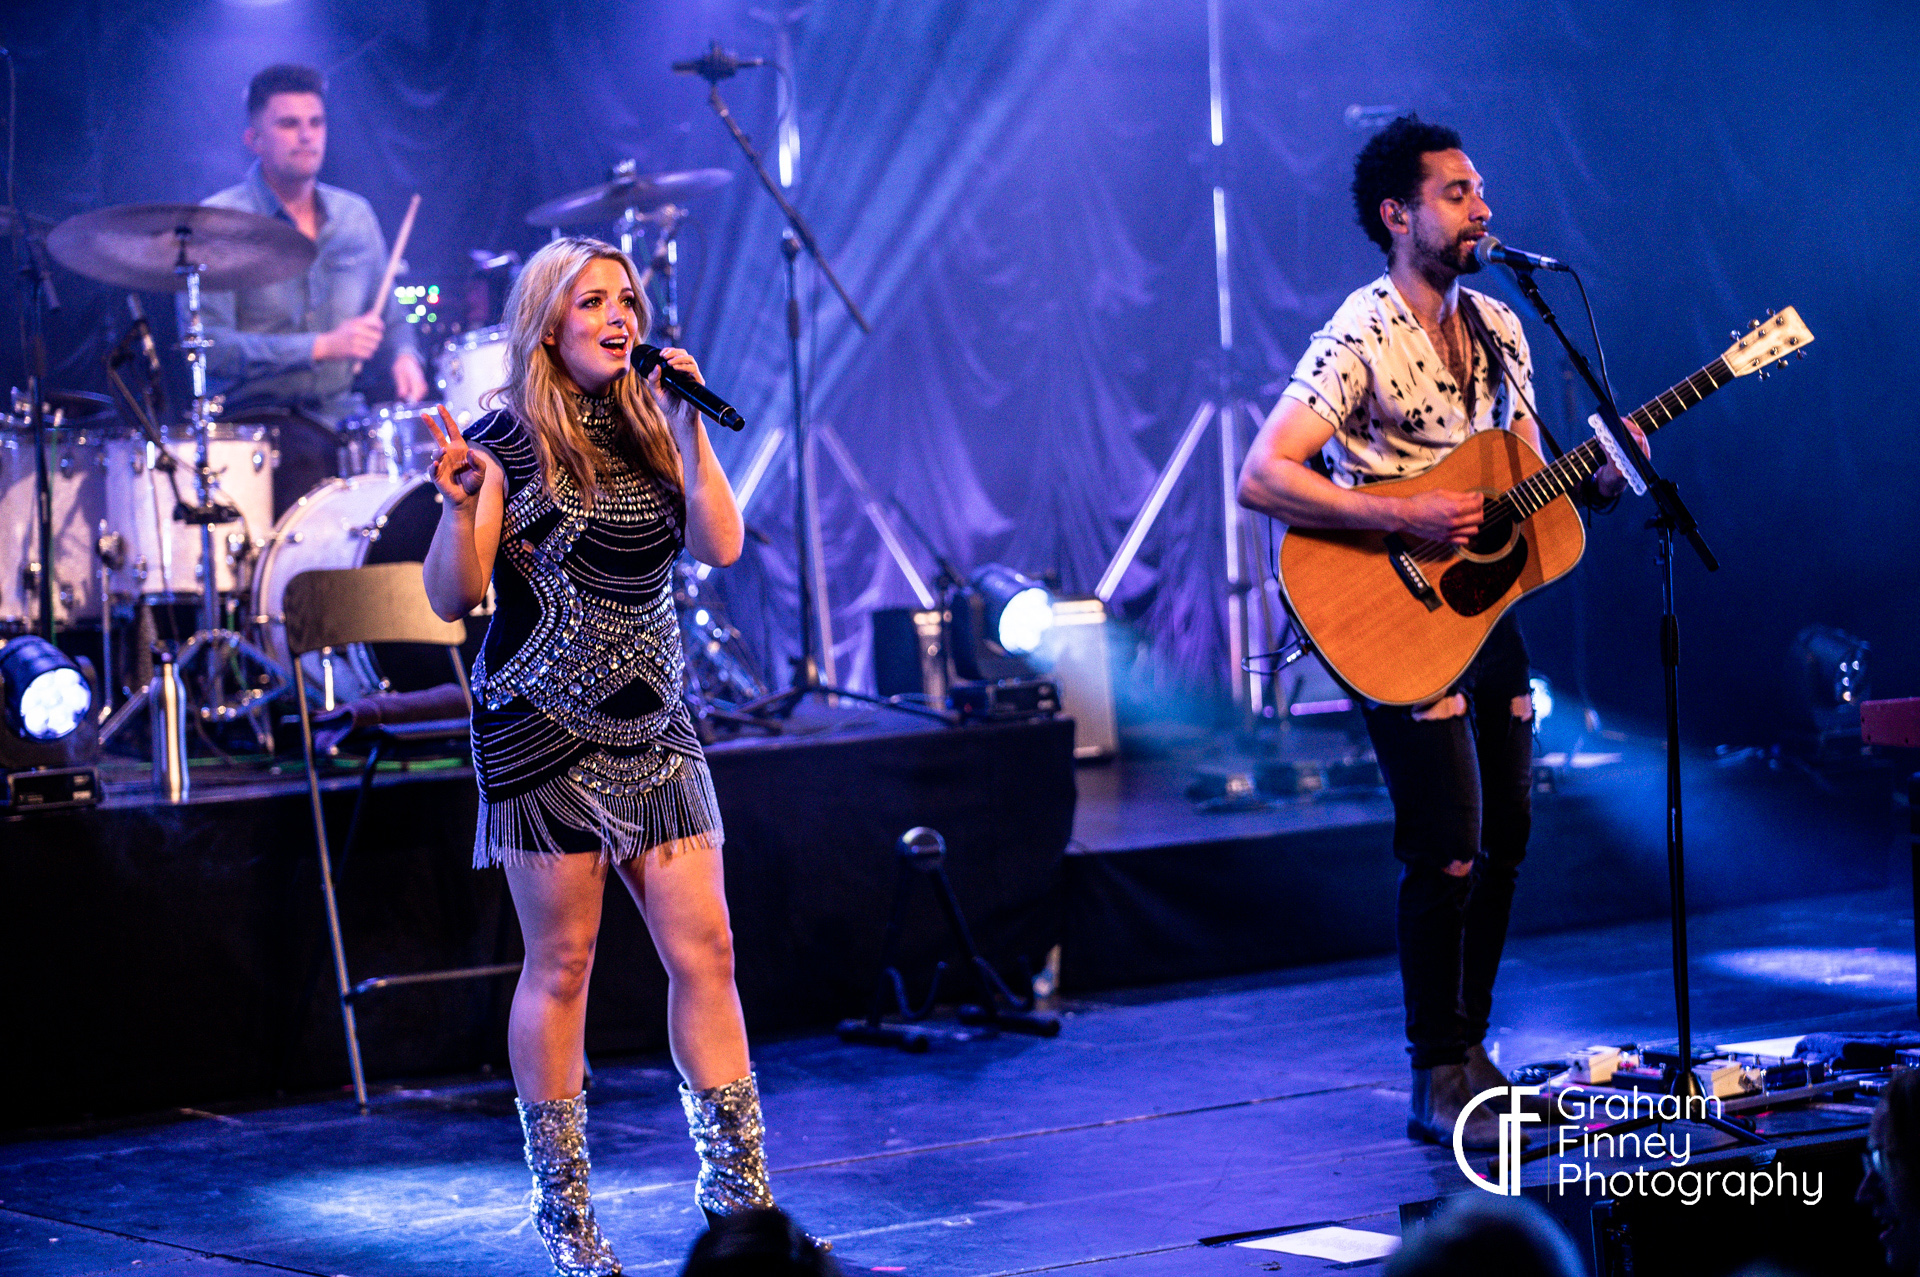 Lingvistică Navy Grajd  Country Duo The Shires (w/ Eric Paslay) Light Up York's Barbican Theatre  [Photos] - V13.net